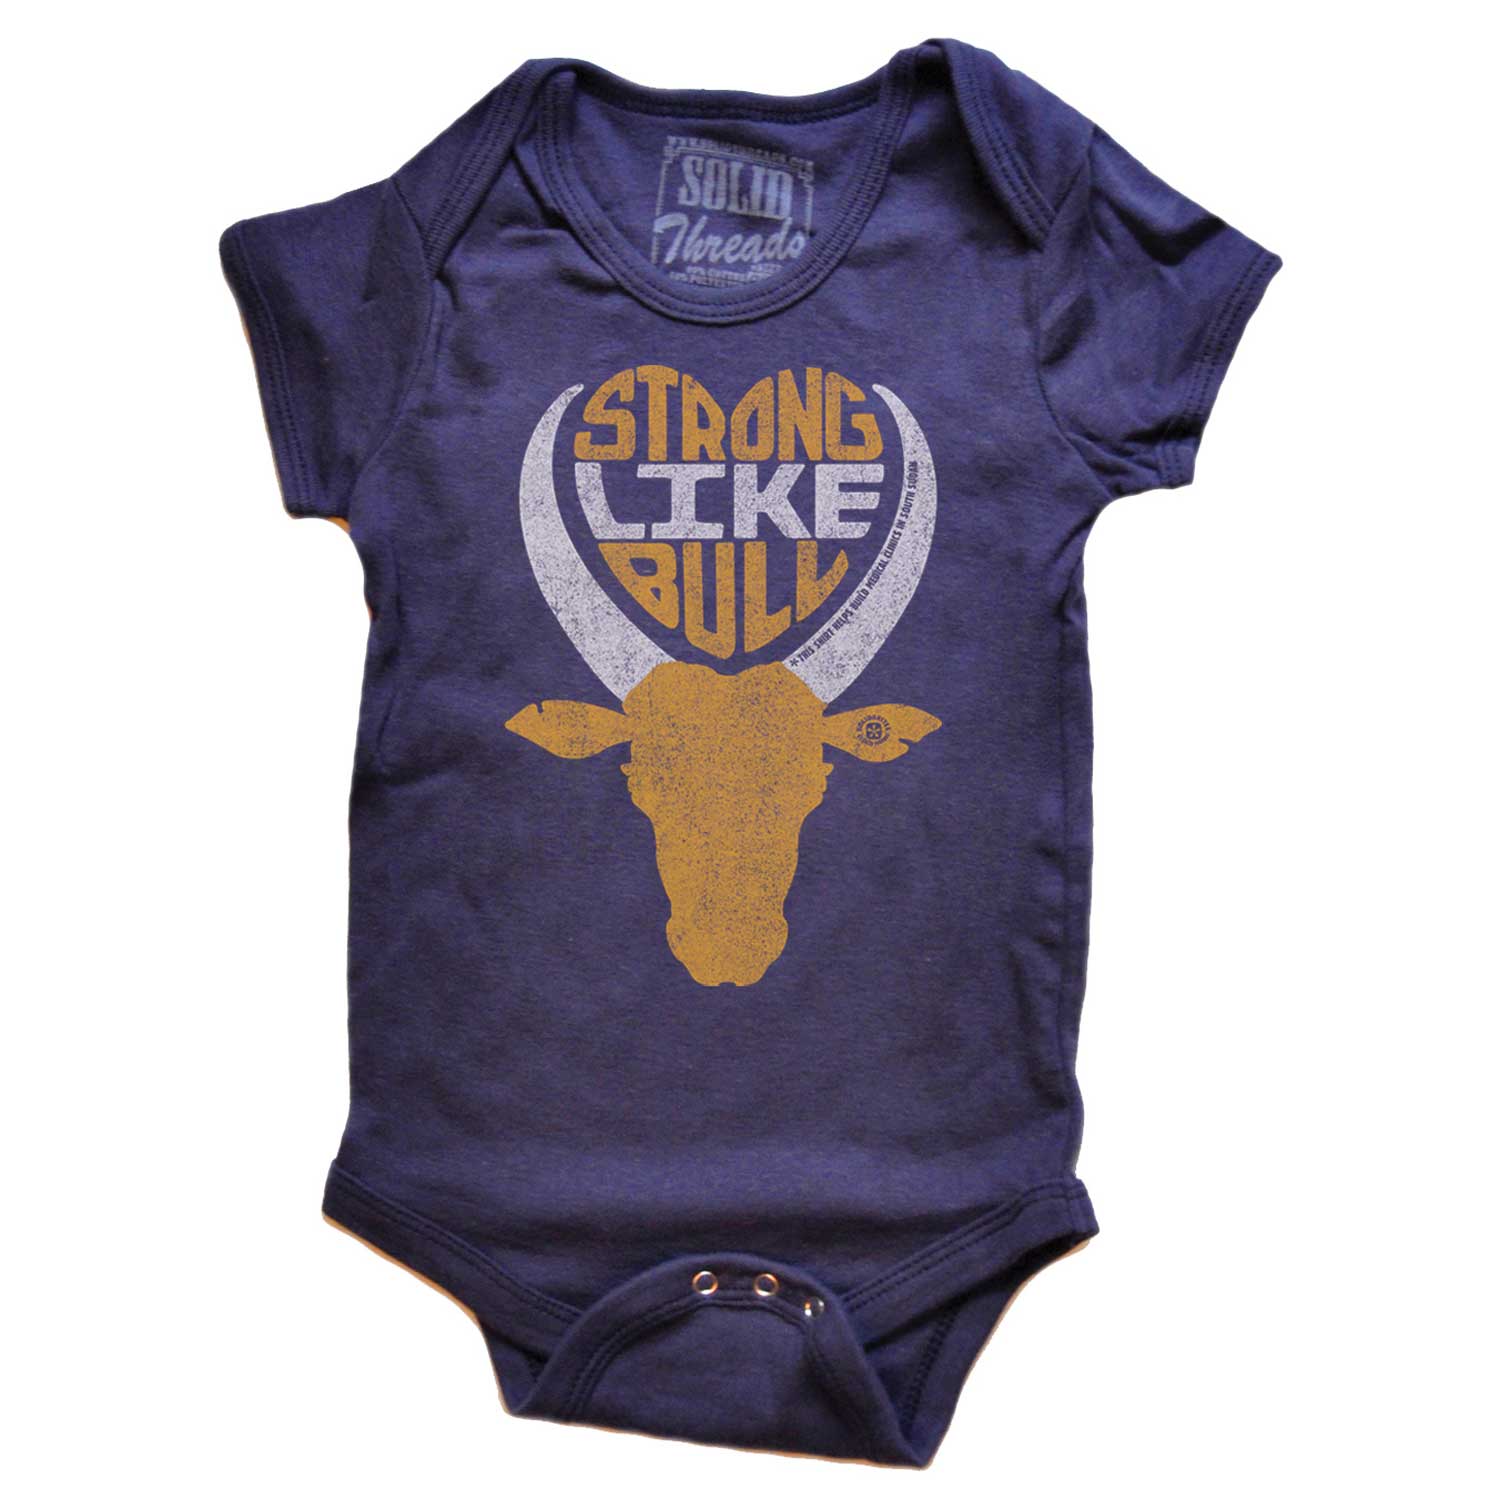 Baby Strong Like Bull Retro Movie Graphic One Piece Romper | Blue SUDEF Baby Onesie | SOLID THREADS